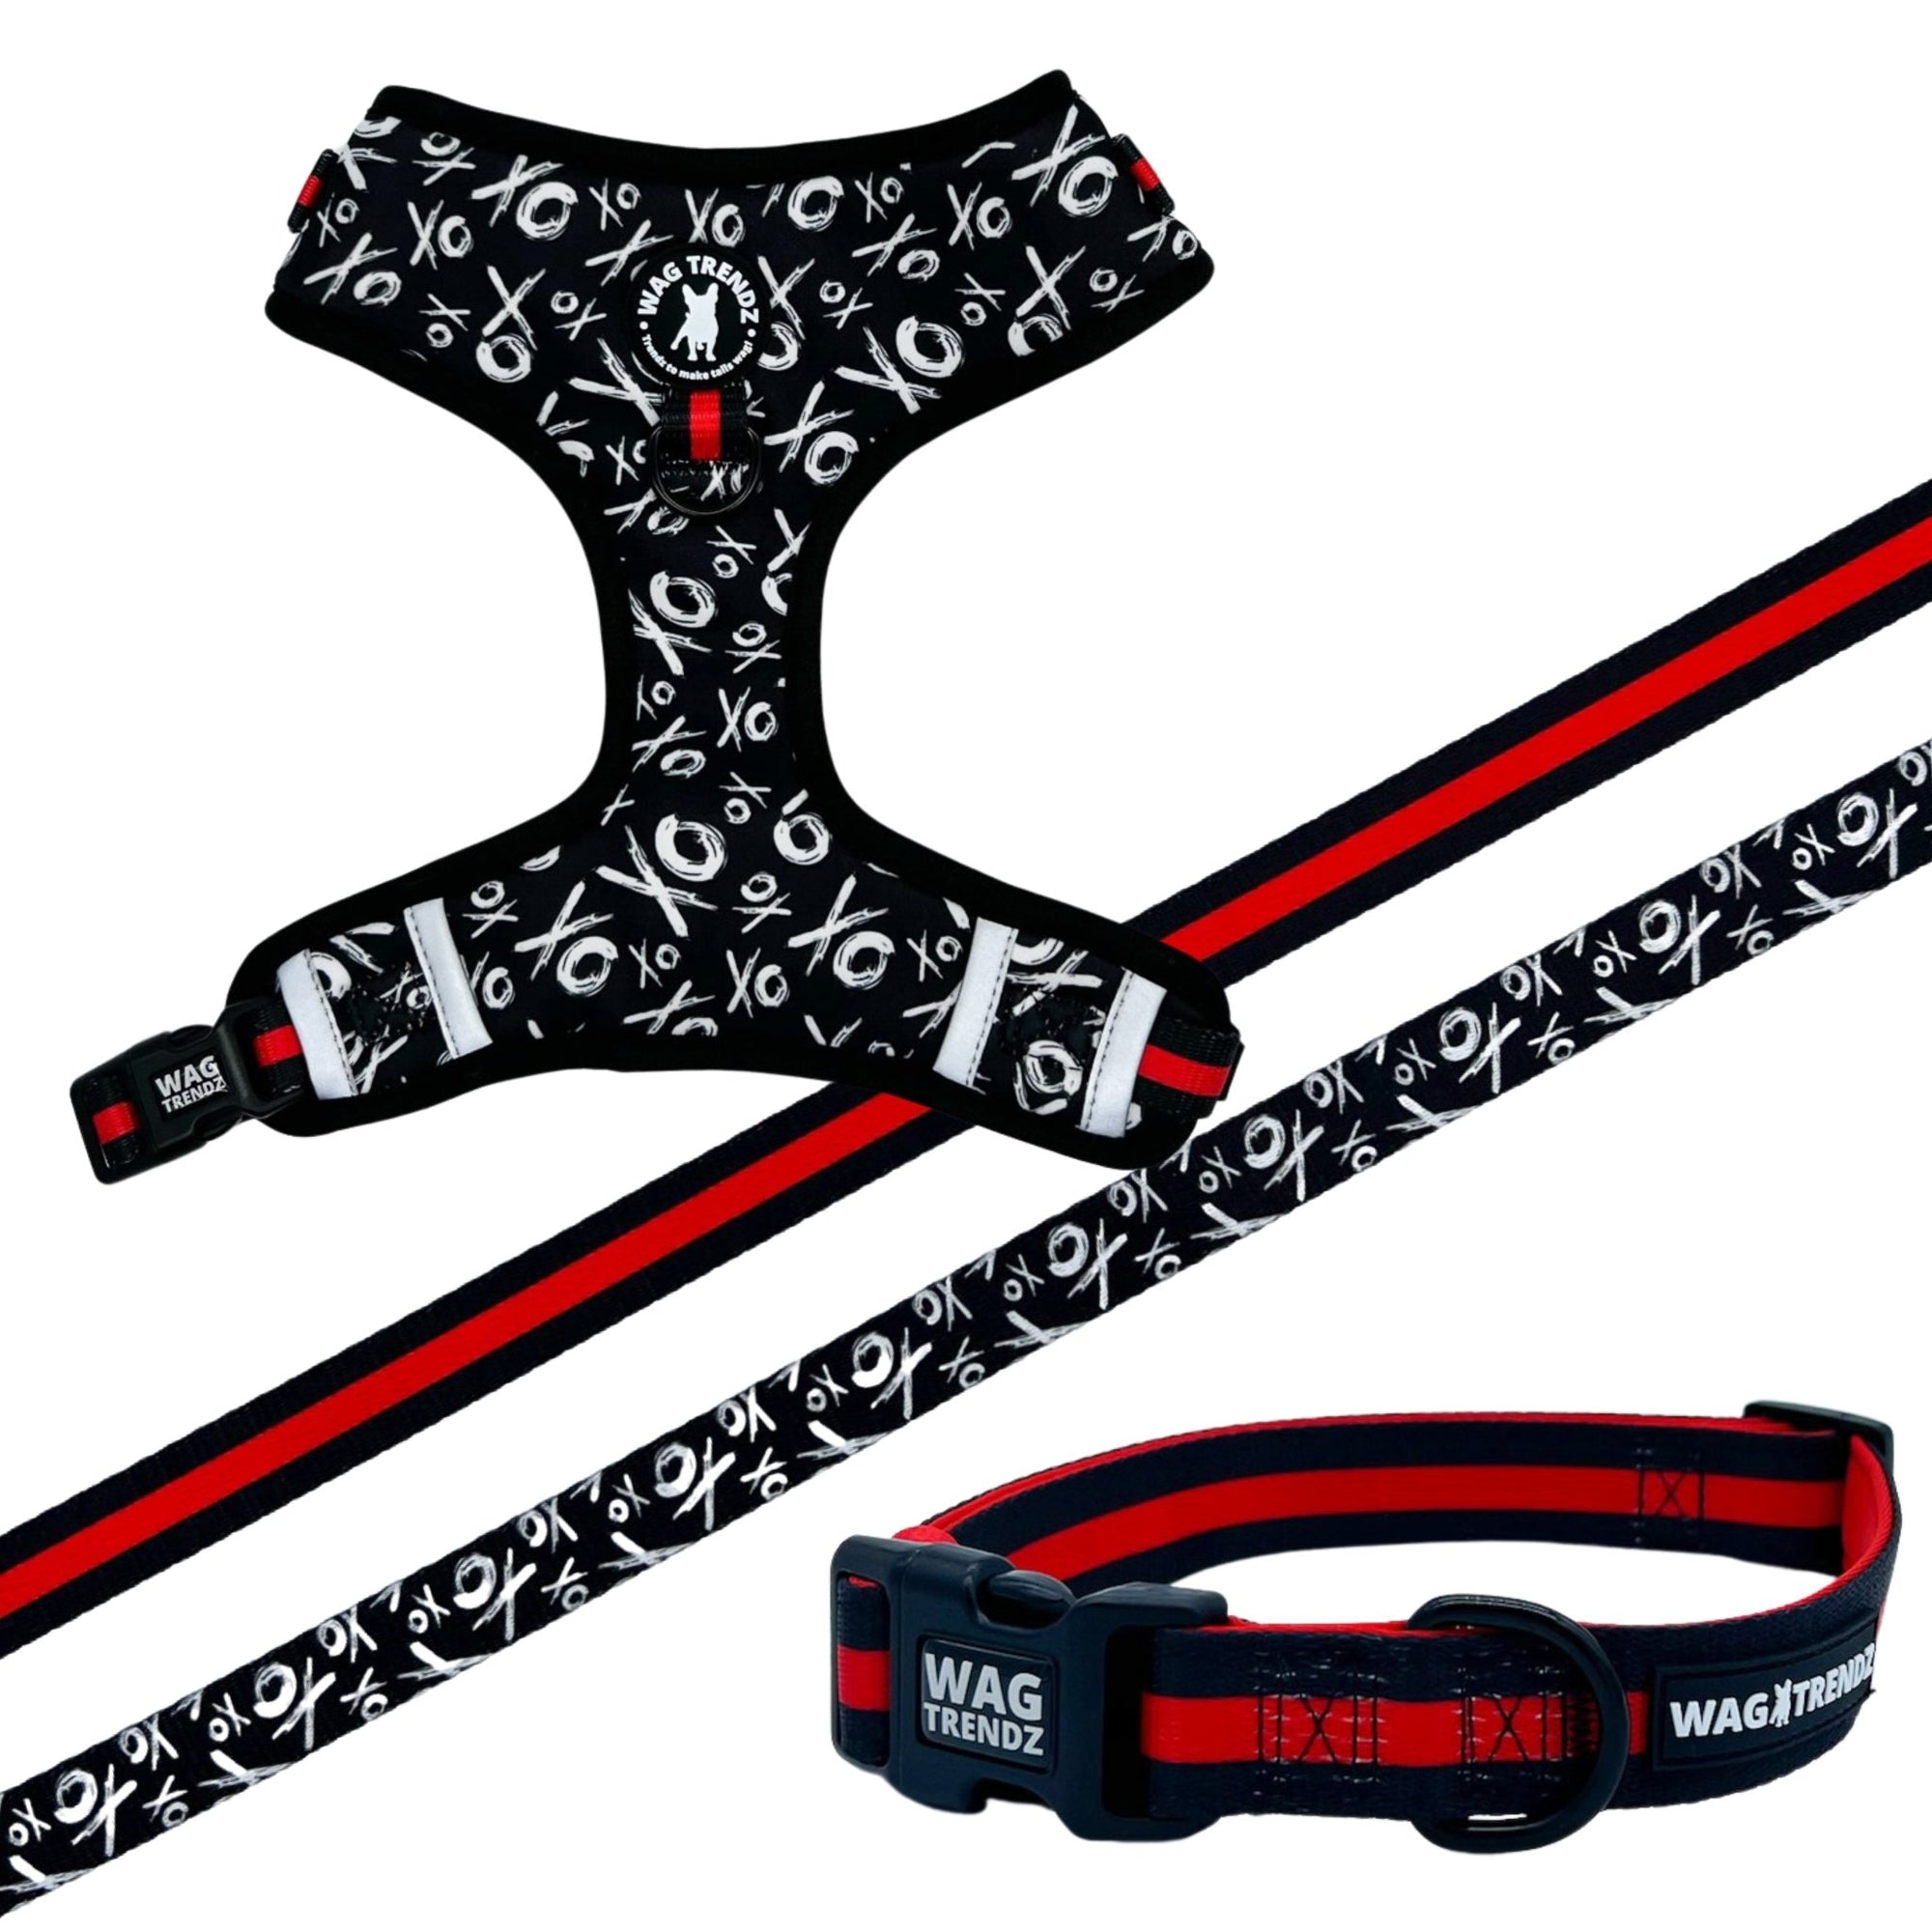 Dog Collar Harness and Leash Set - Dog Adjustable Harness in black and white XO&#39;s with bold Red accents with matching dog leash and collar - against solid white background - Wag Trendz